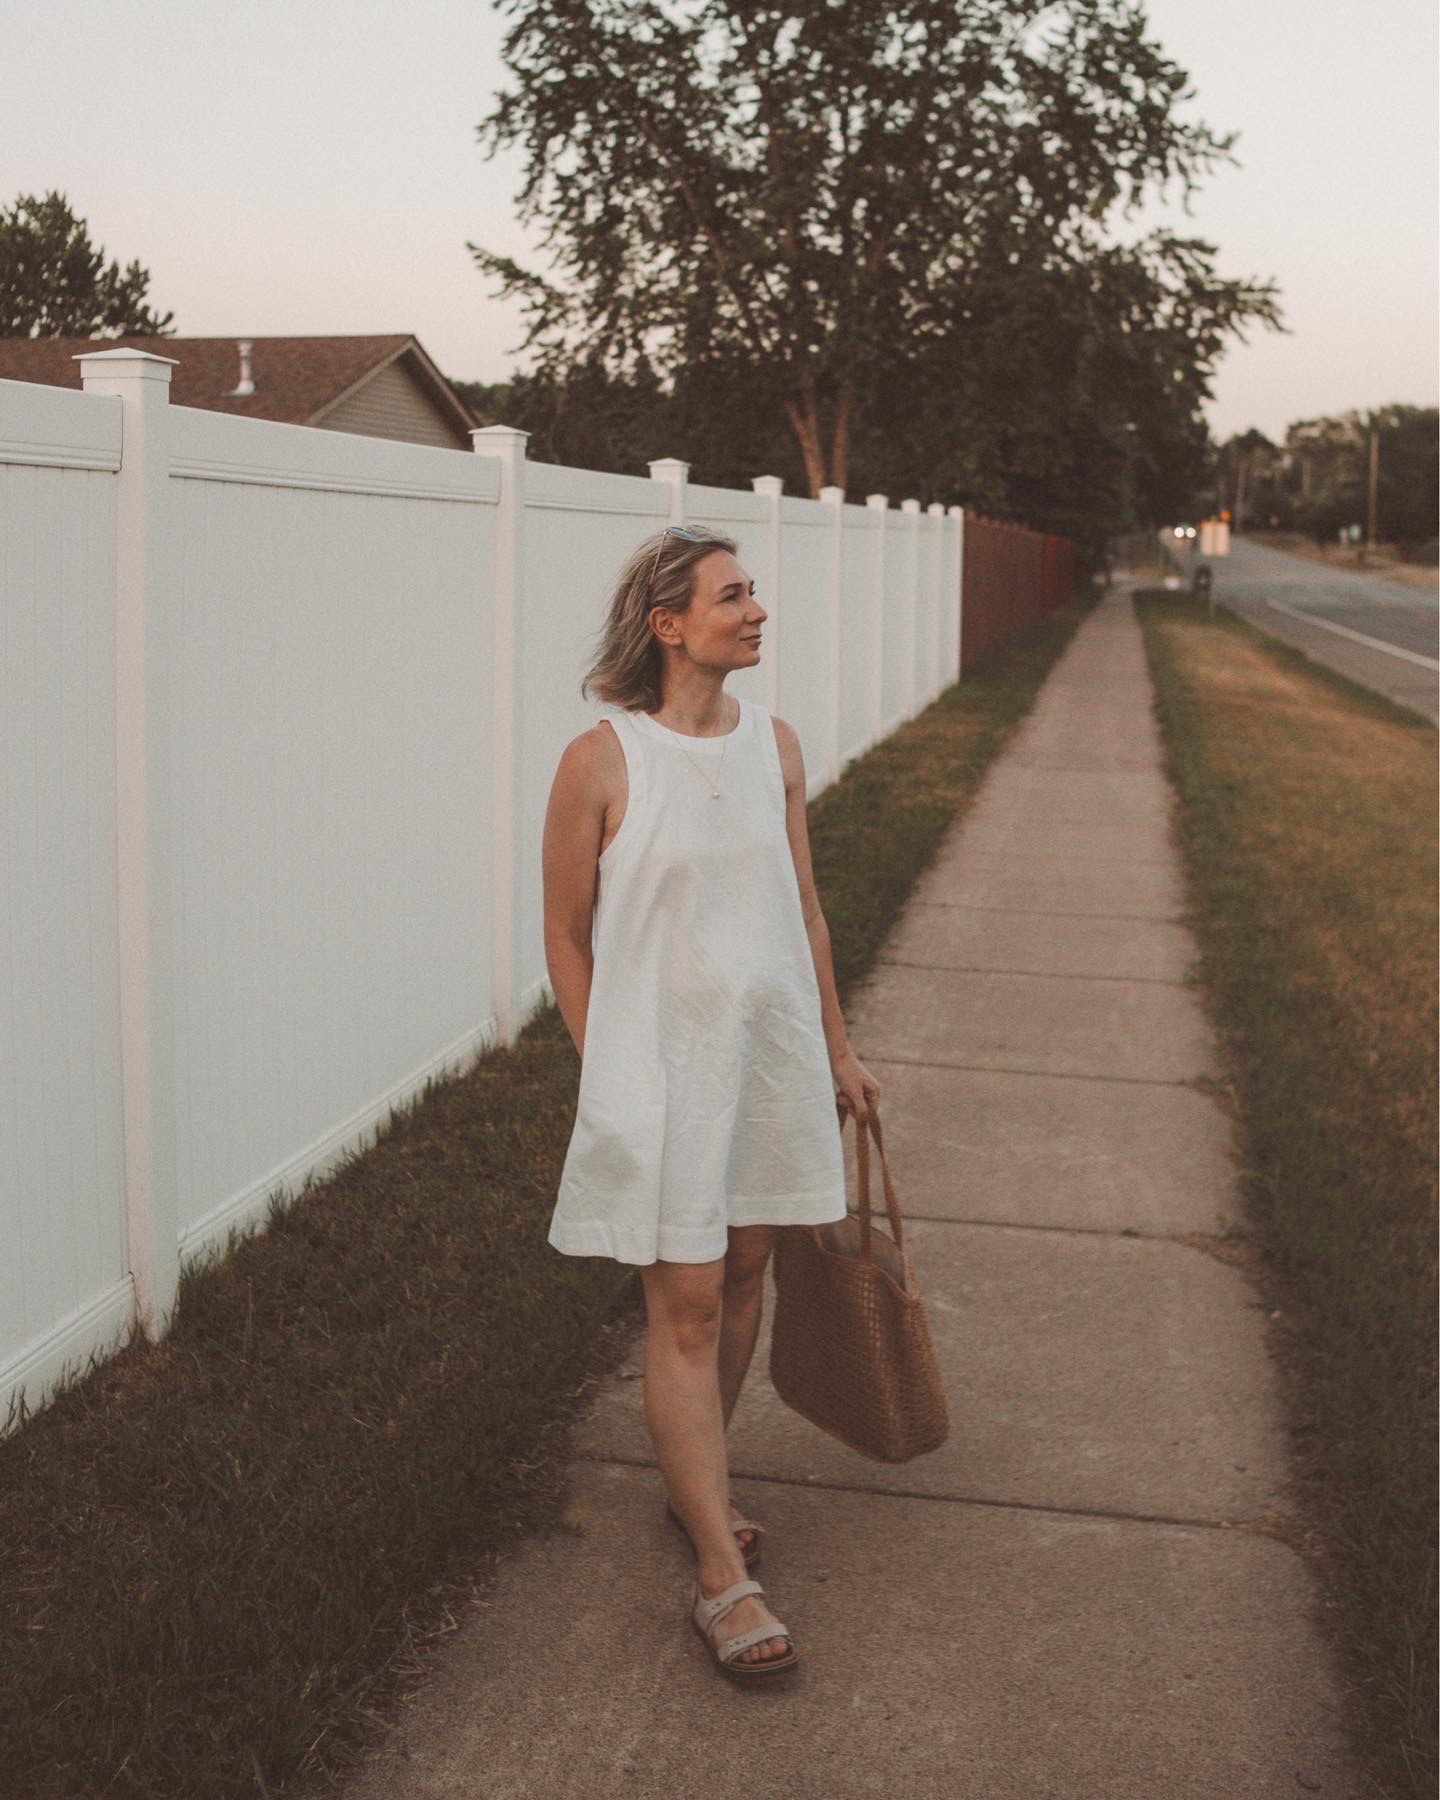 Karin Emily wears a white linen mini dress with a light pair of chunky dad sandals and a woven basket bag